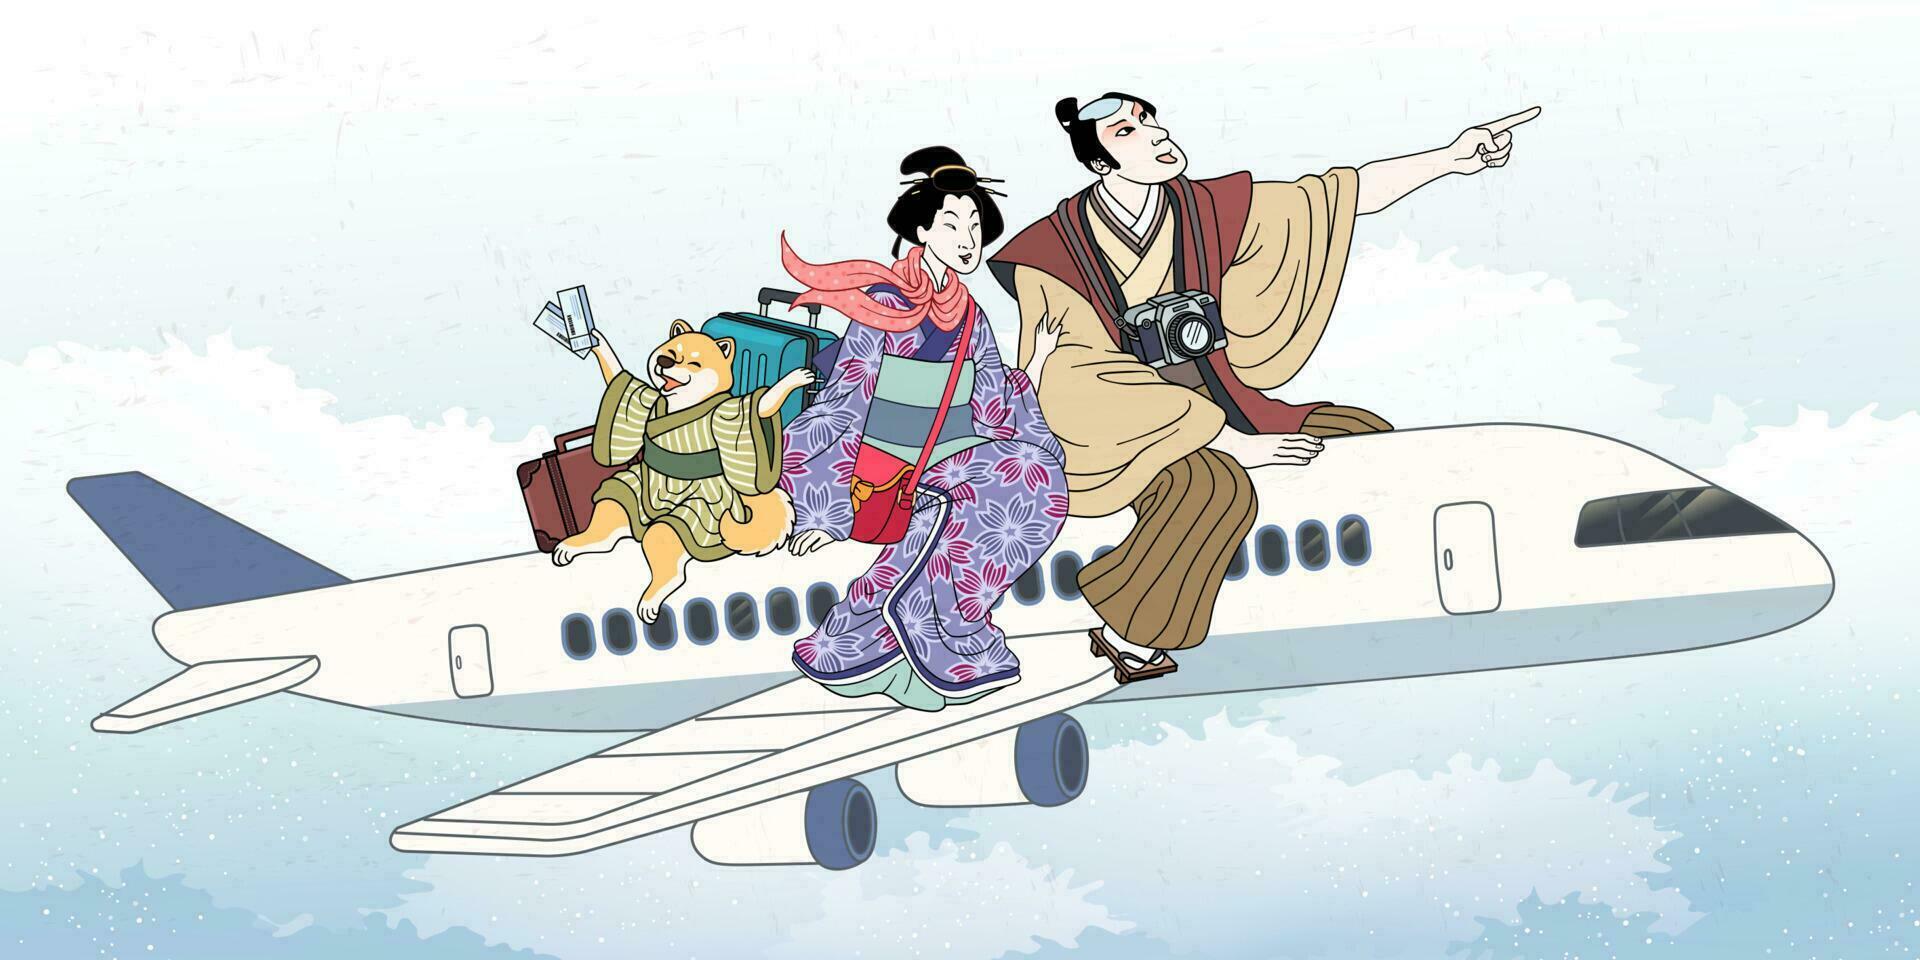 Travel to Japan concept, with geisha, samurai and shiba inu dog sitting on airplane excitingly, isolated on cloudy background vector